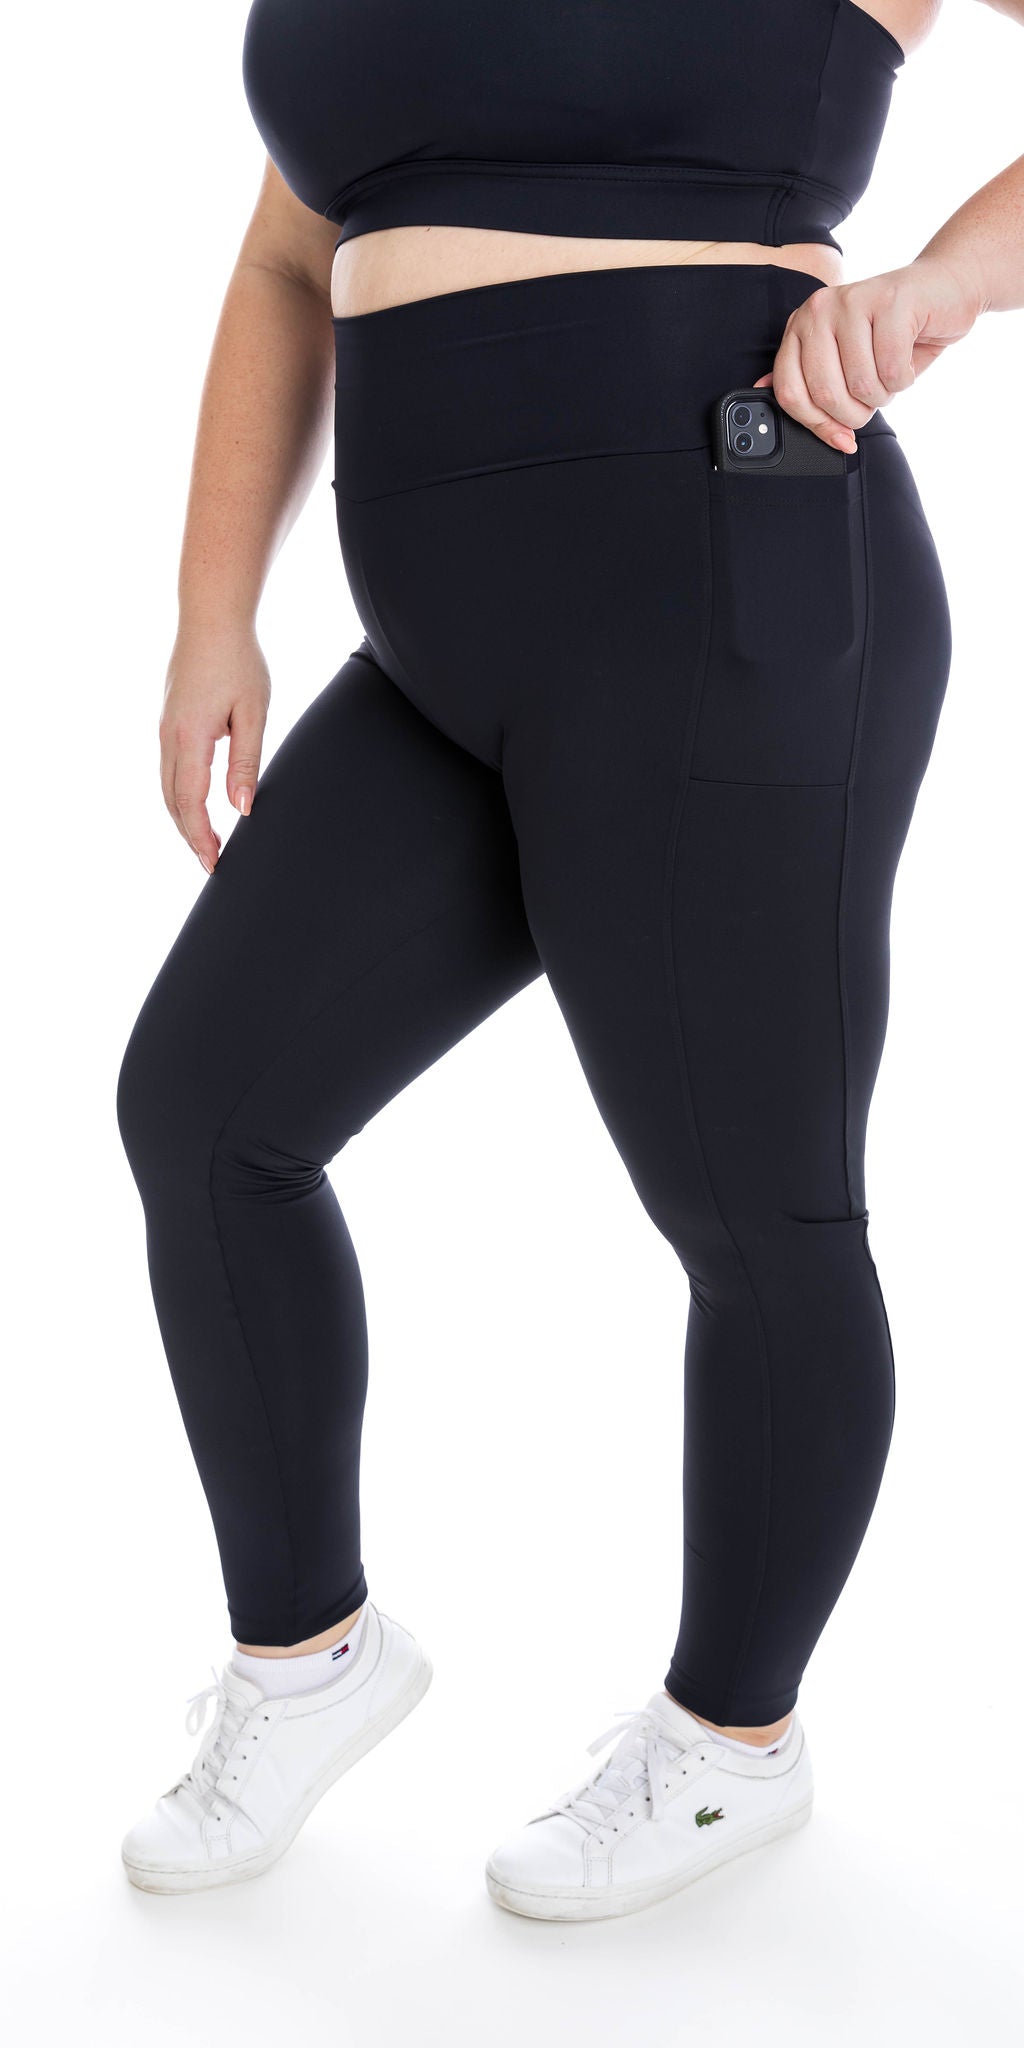 Leggings with pockets - Midnight Leopard - Plus Size Active